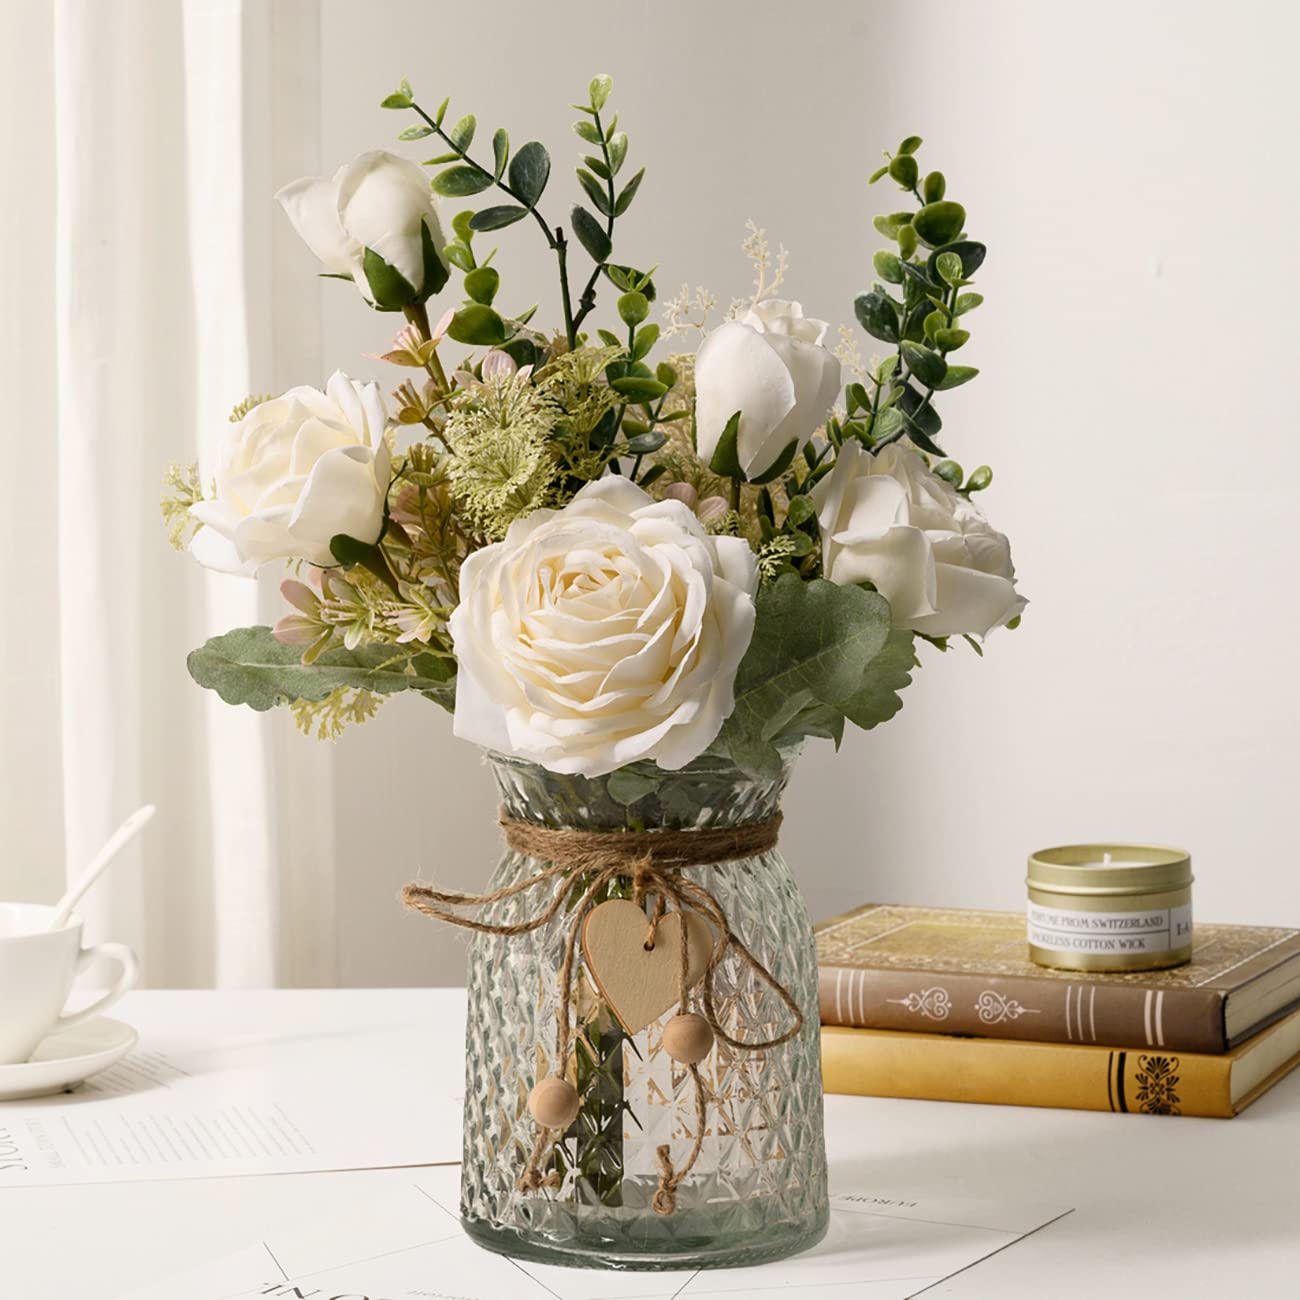 How To Do Silk Floral Arrangements In Vases